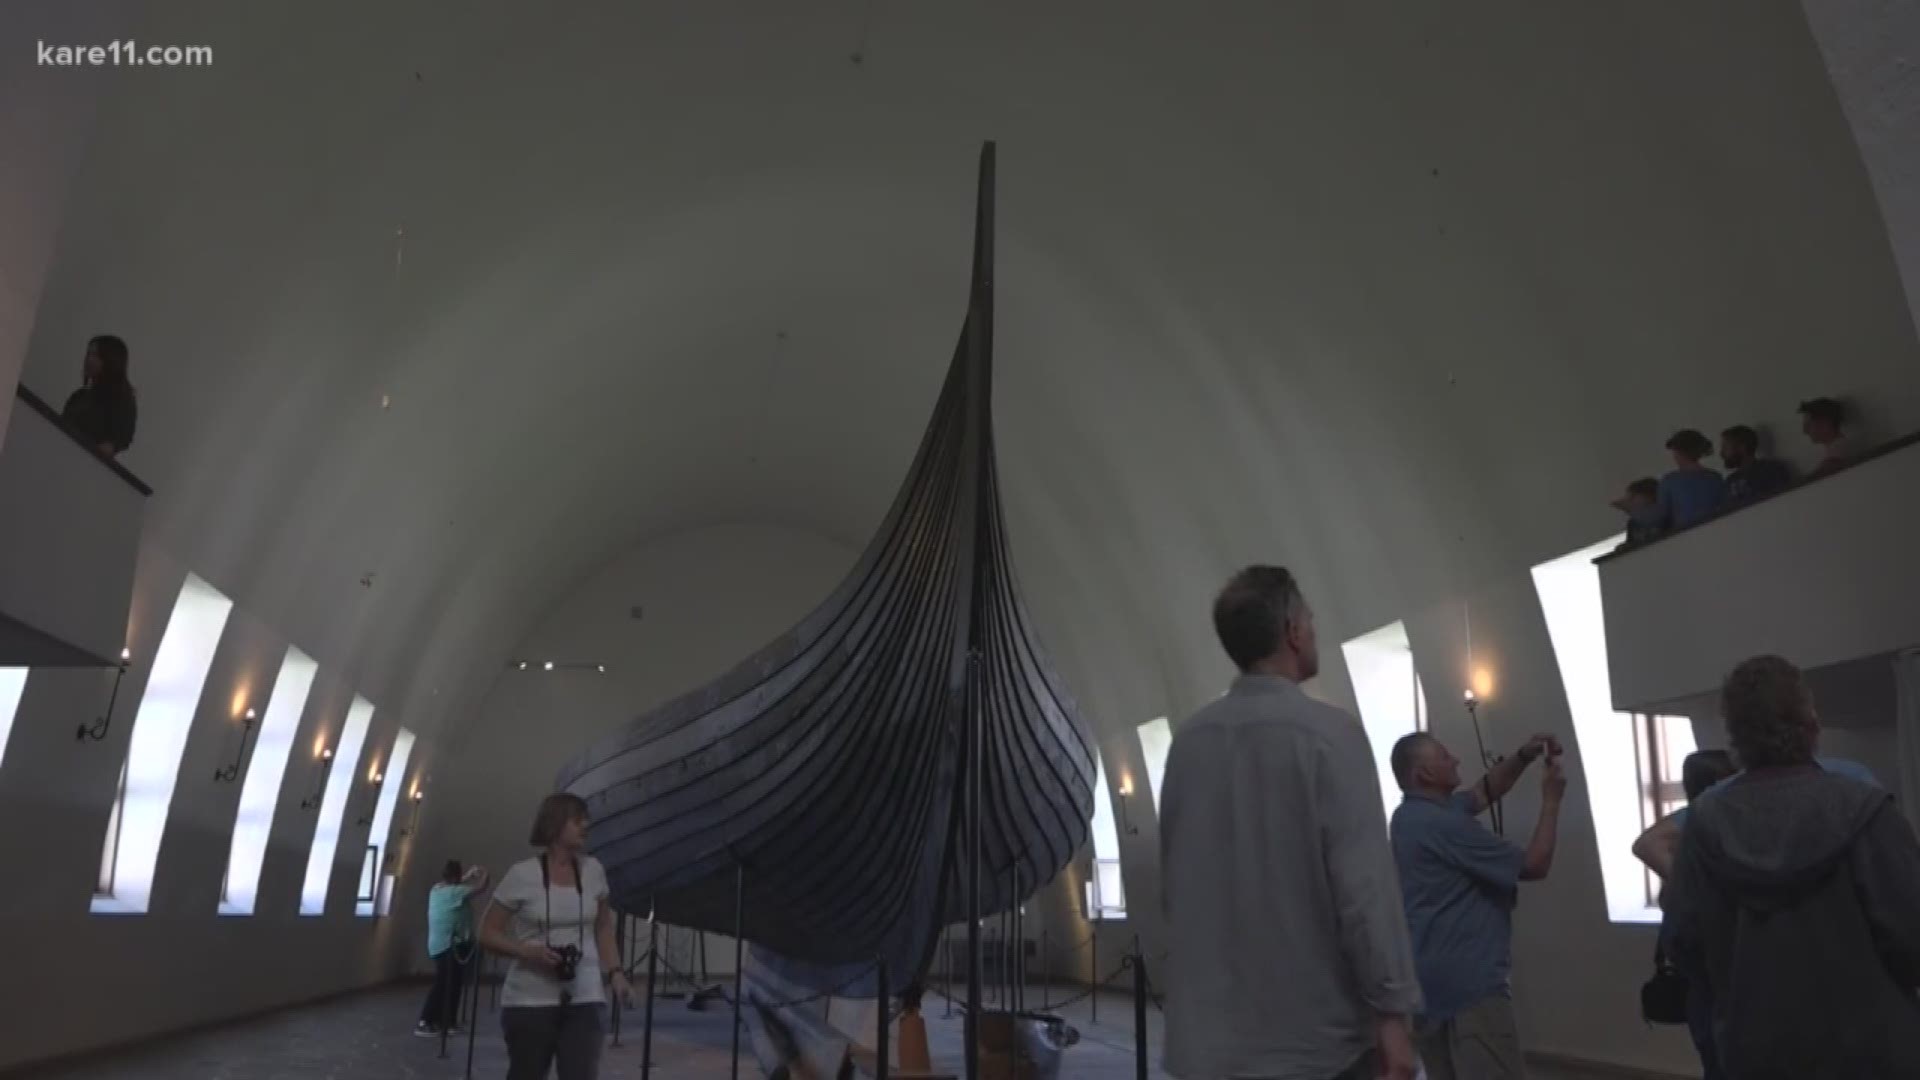 On his way to the Arctic, Sven stopped at The Viking Ship Museum in Oslo and explains how warm weather made the Viking Age possible. https://kare11.tv/2OzvyKQ